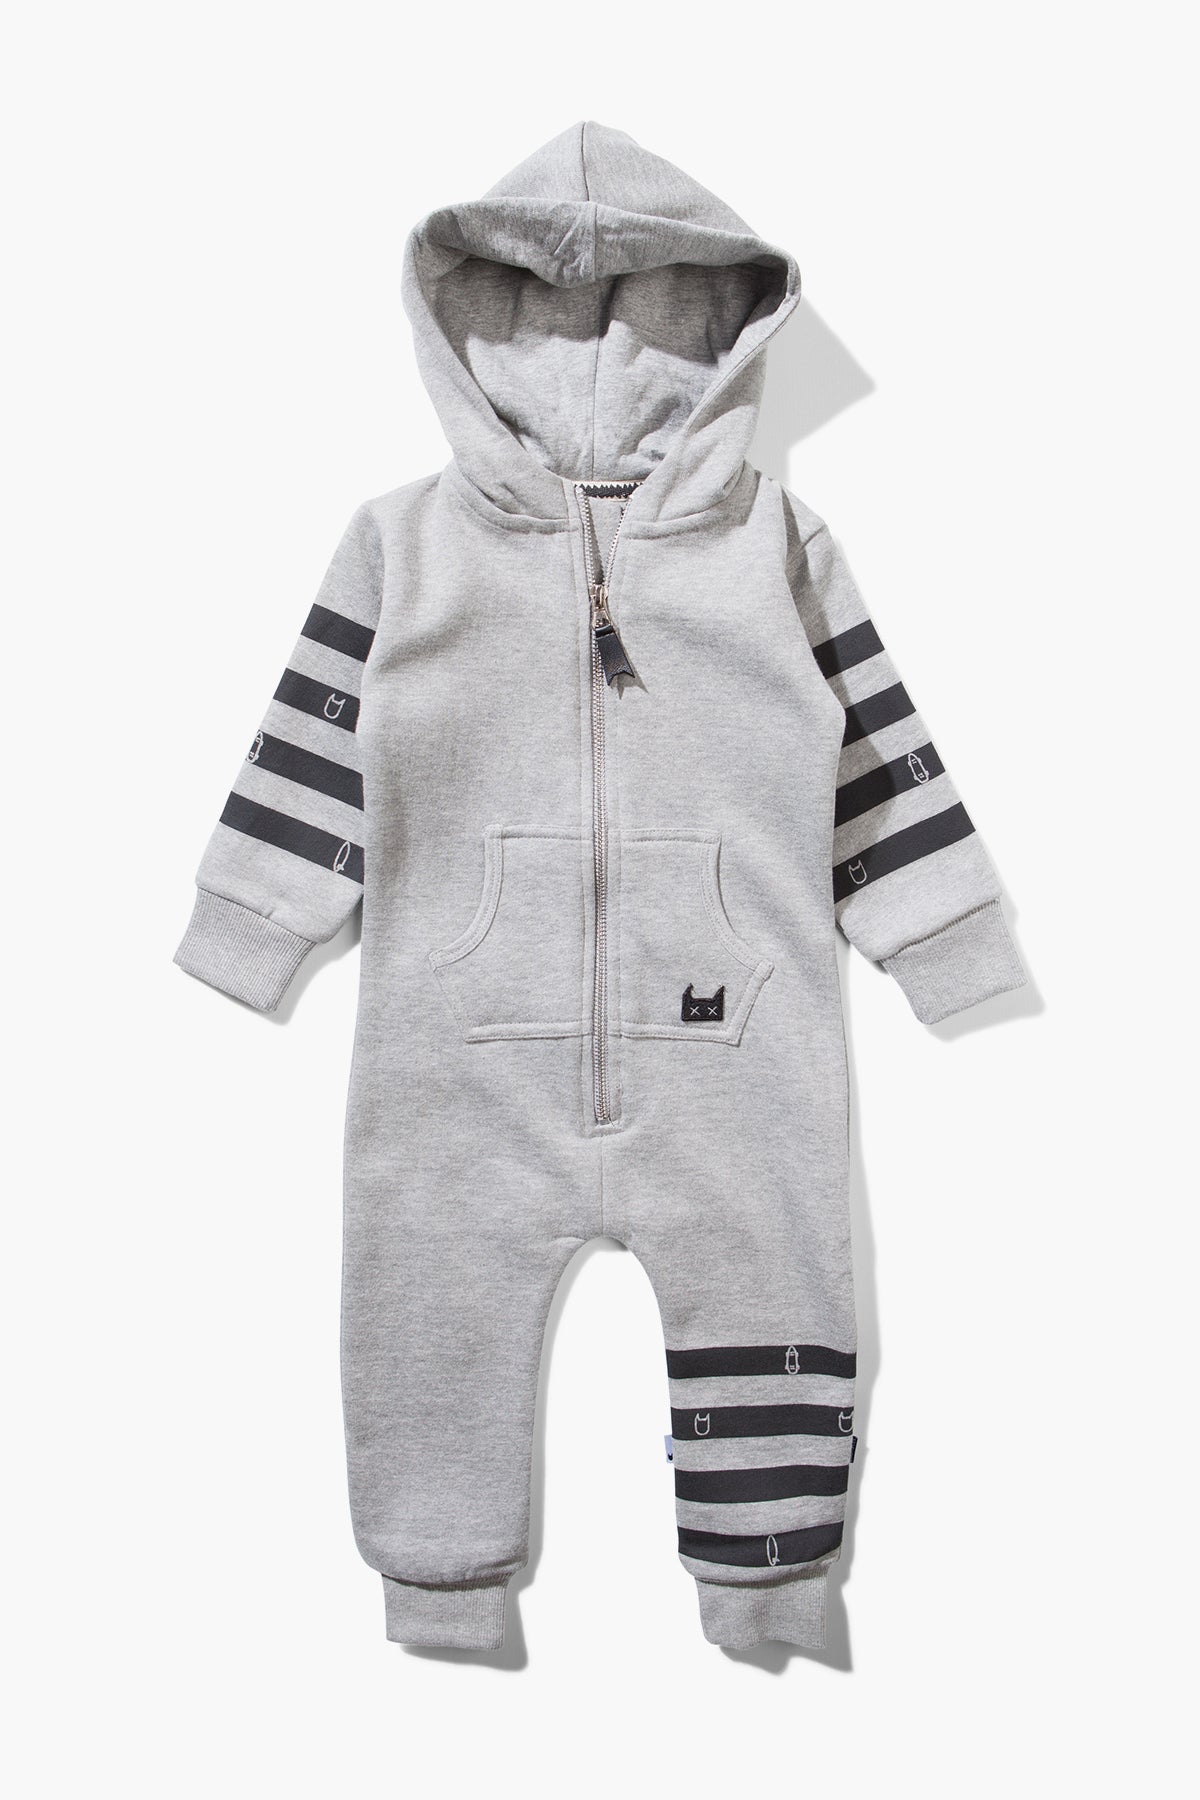 Munster Kids Cruz All In One Baby Boys Jumpsuit - Grey Marle (Size 6/1 ...